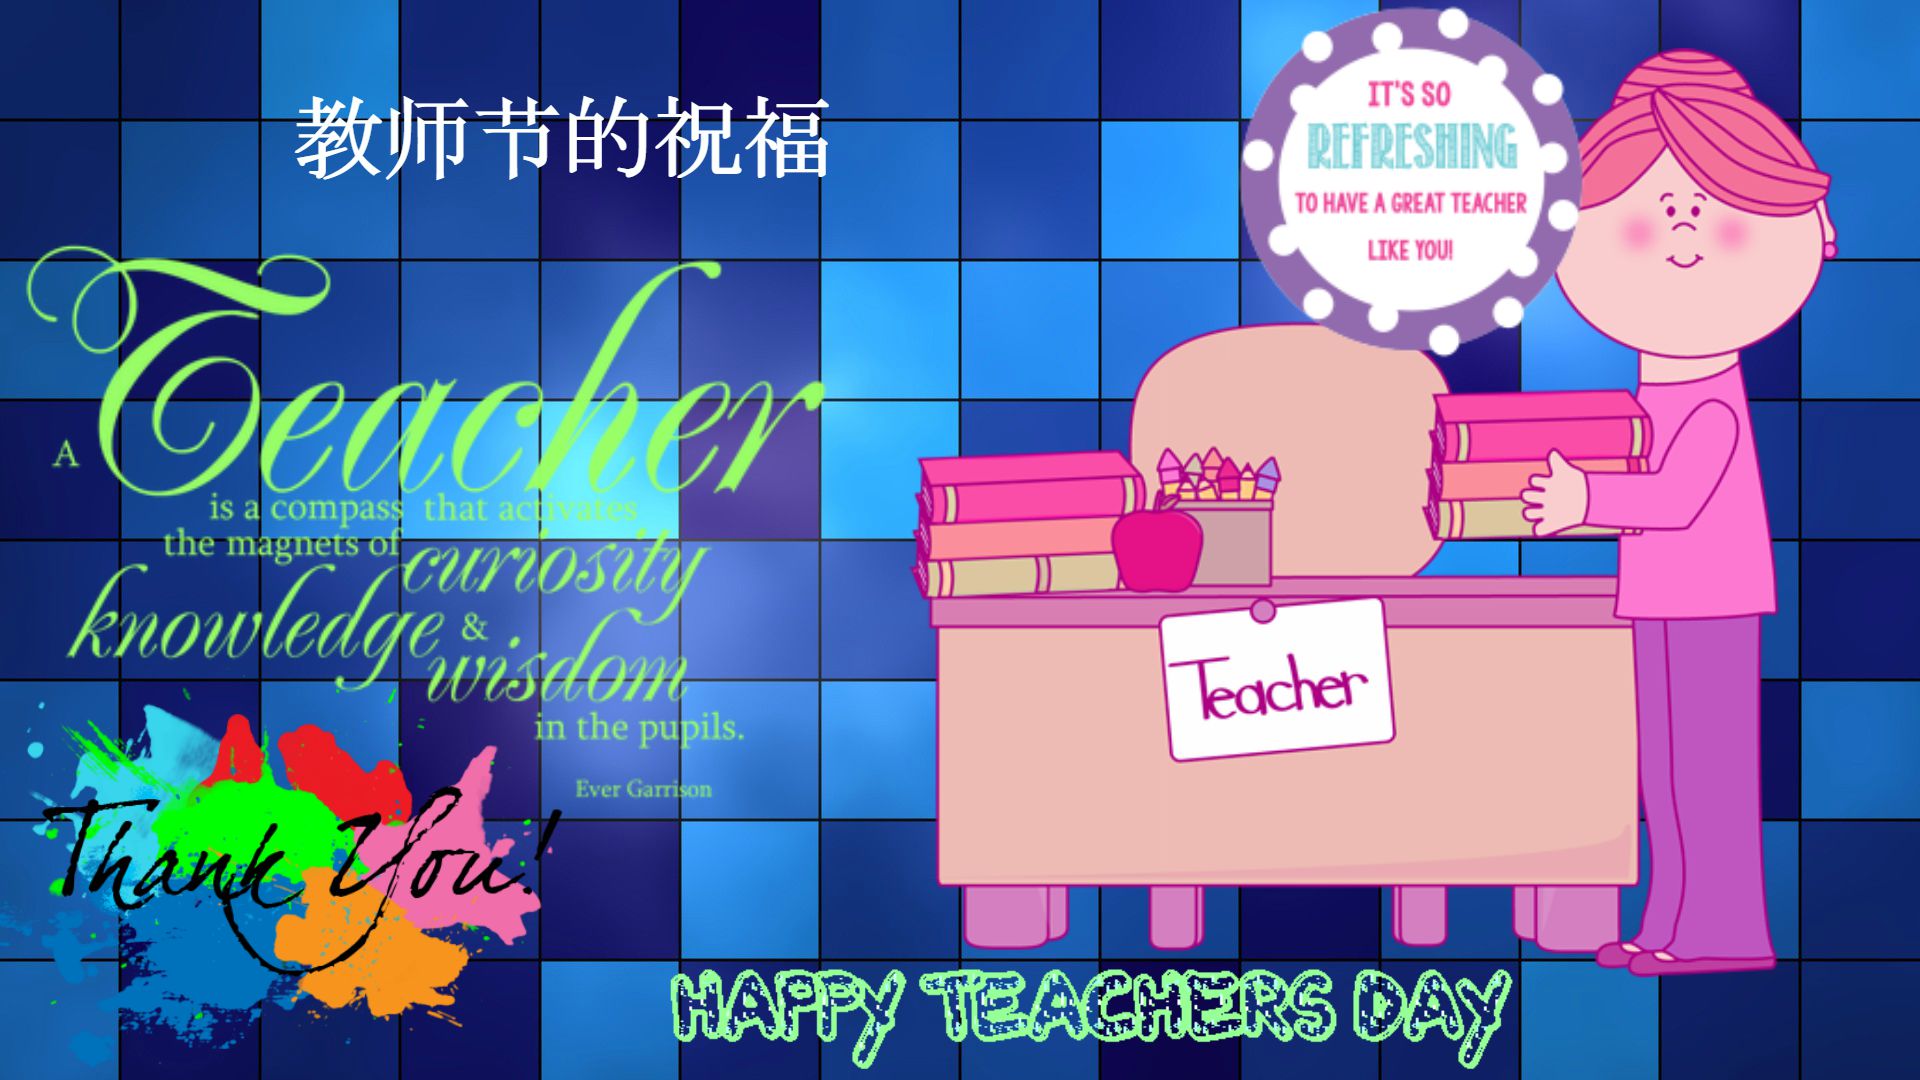 Happy teachers day in chinese